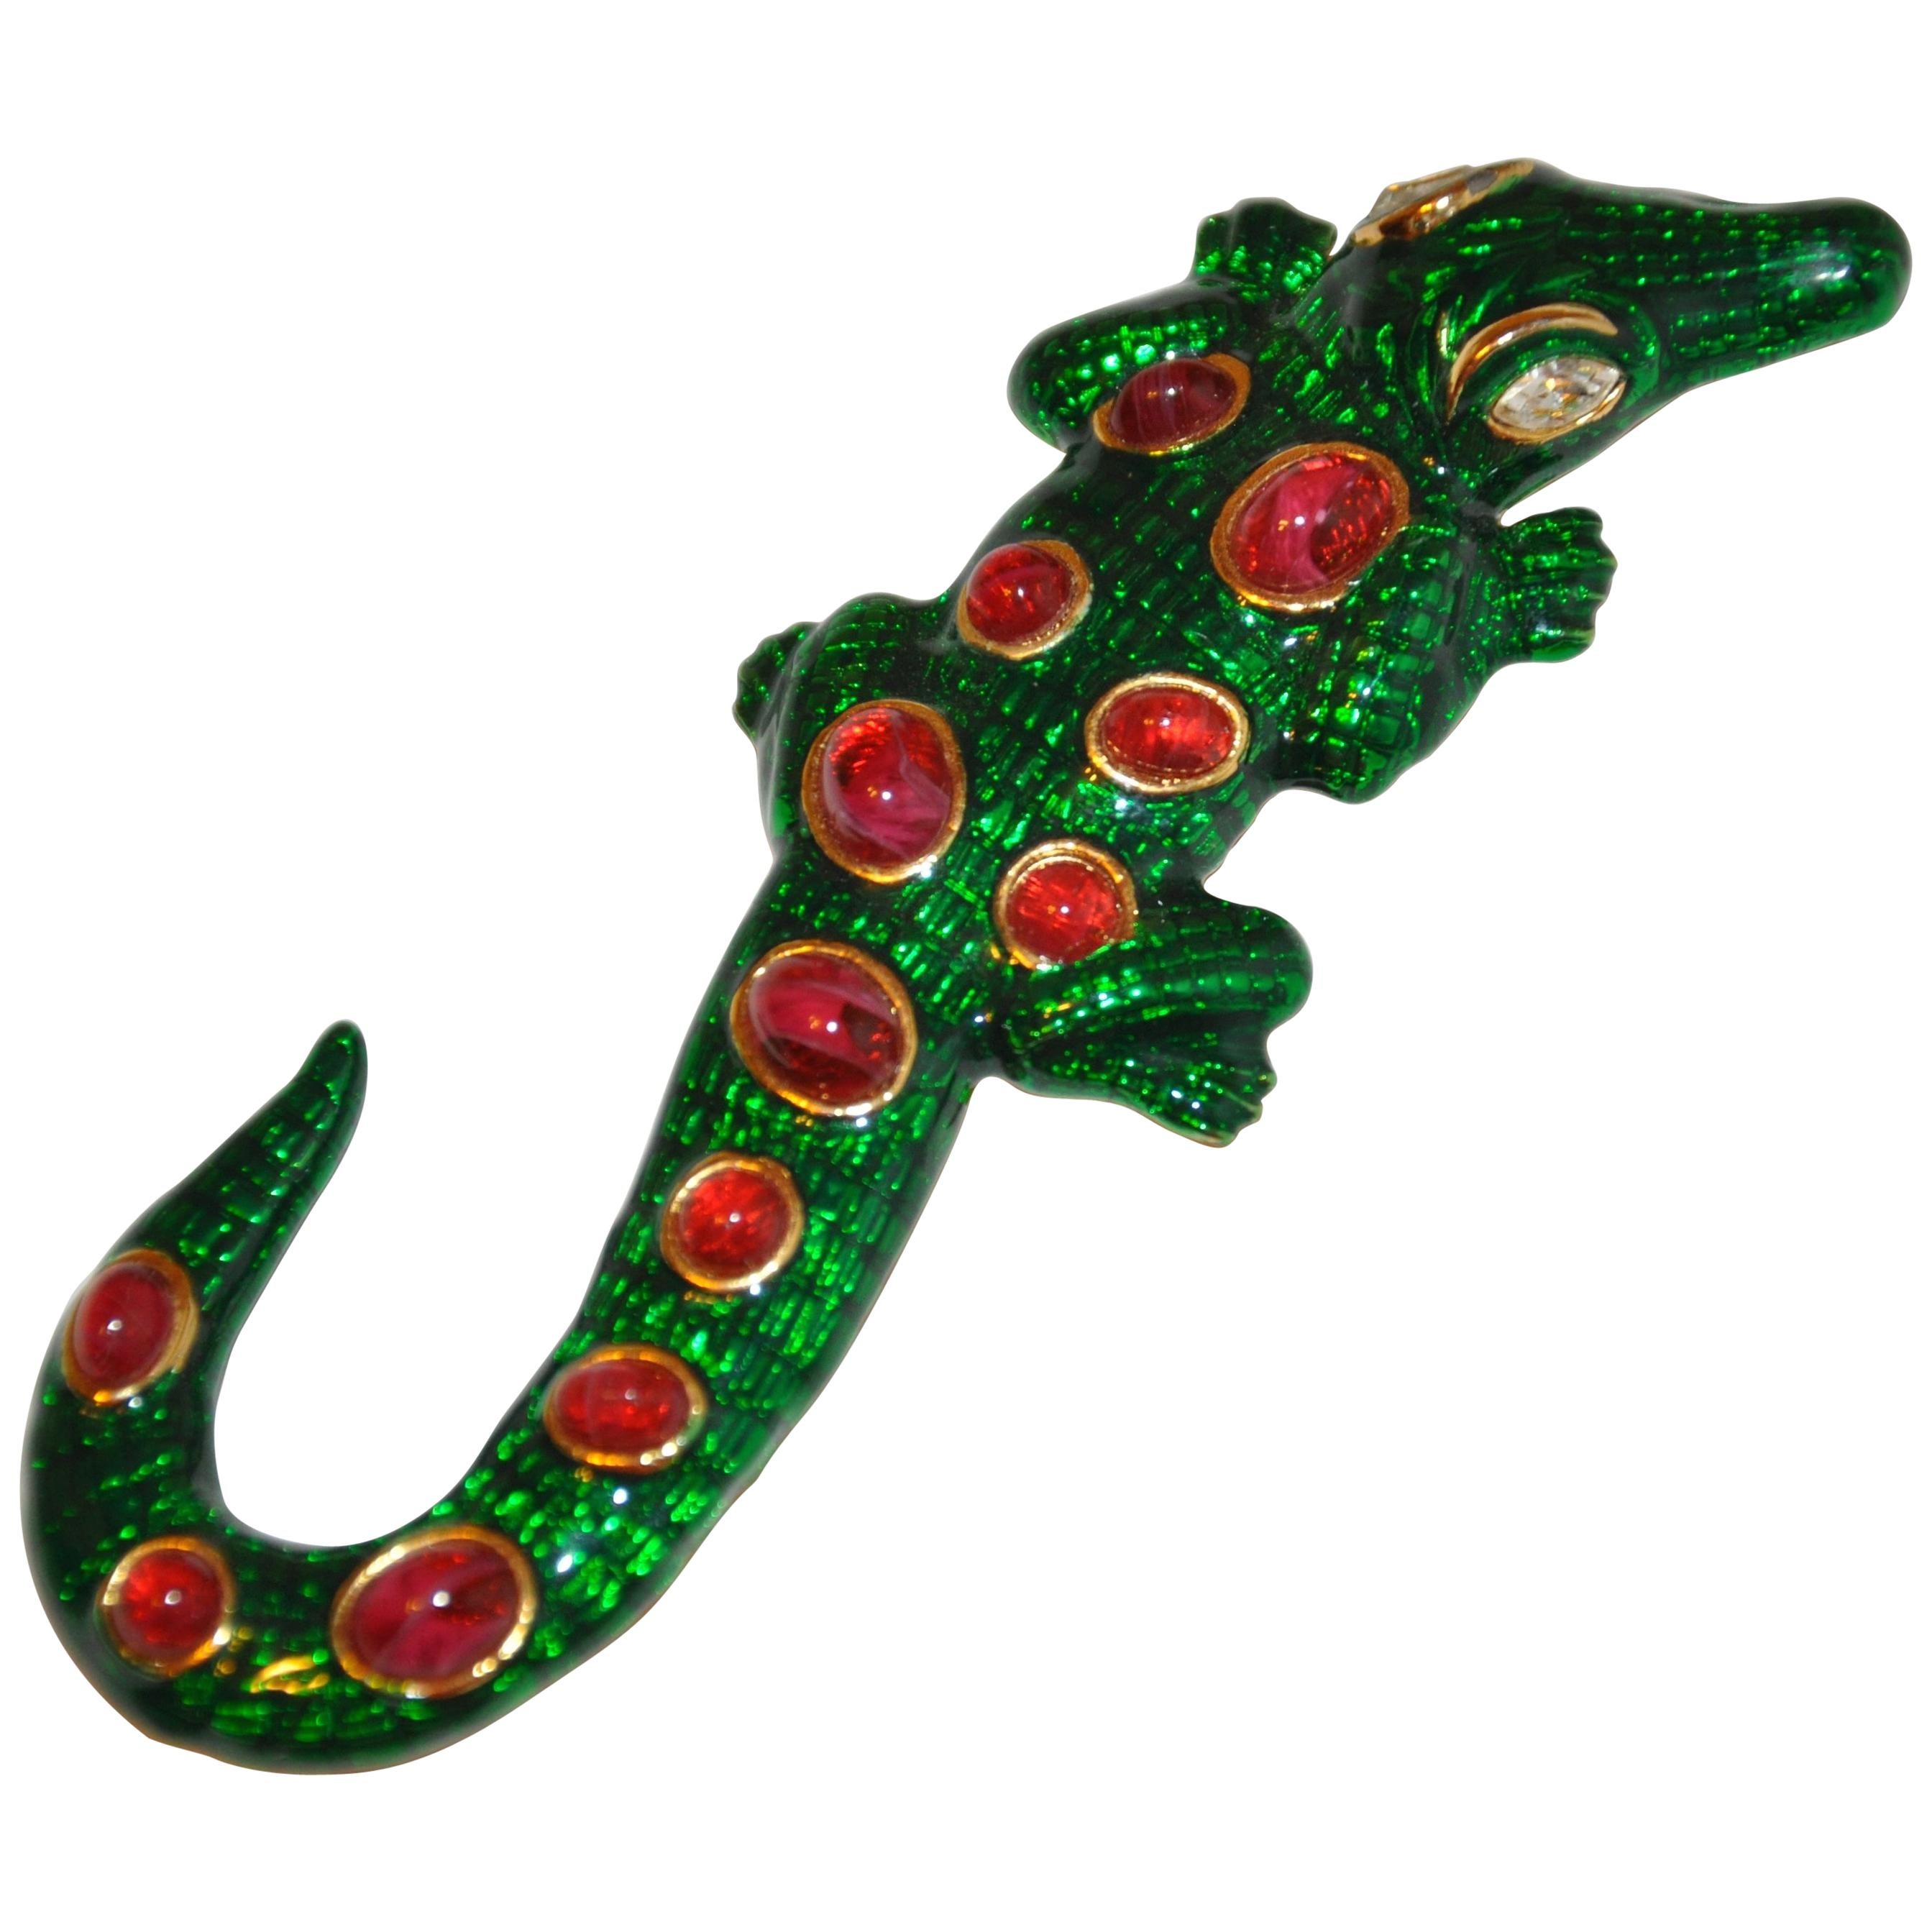 Kenneth Lane Whimsical Green Enamel with Ruby-Like Accent "Alligator" Brooch For Sale